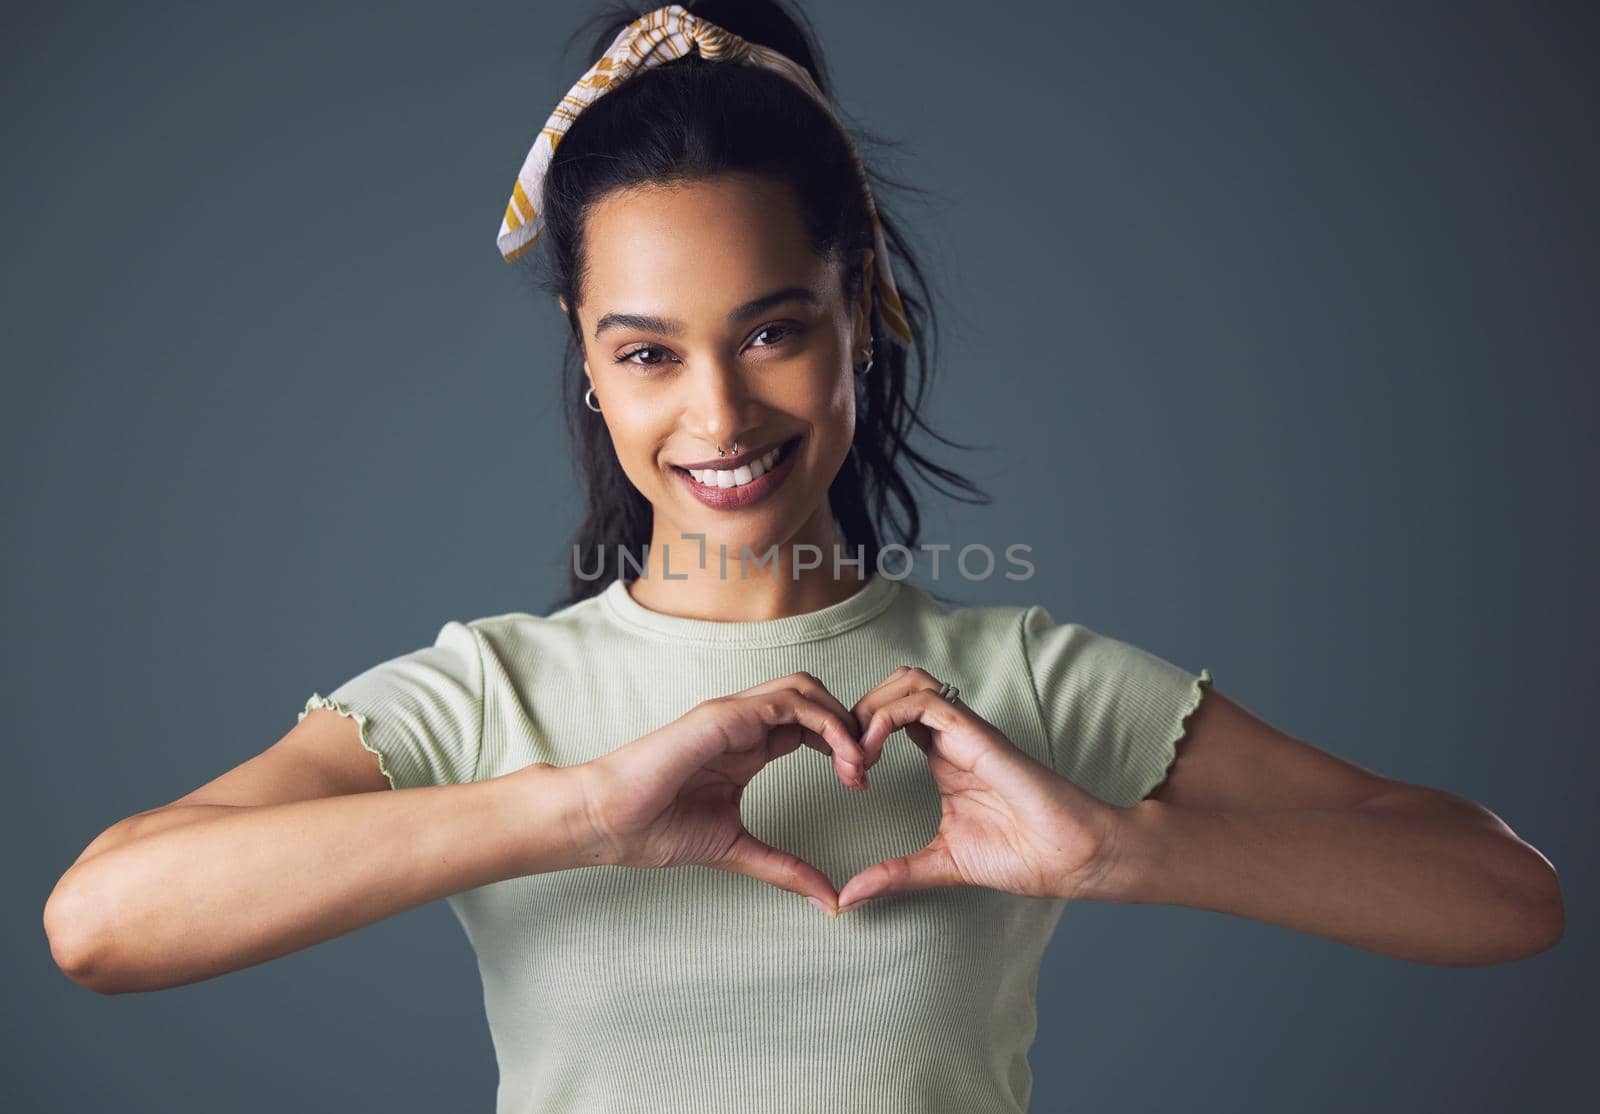 Studio shot of a young woman forming a heart shape while standing against a grey background.